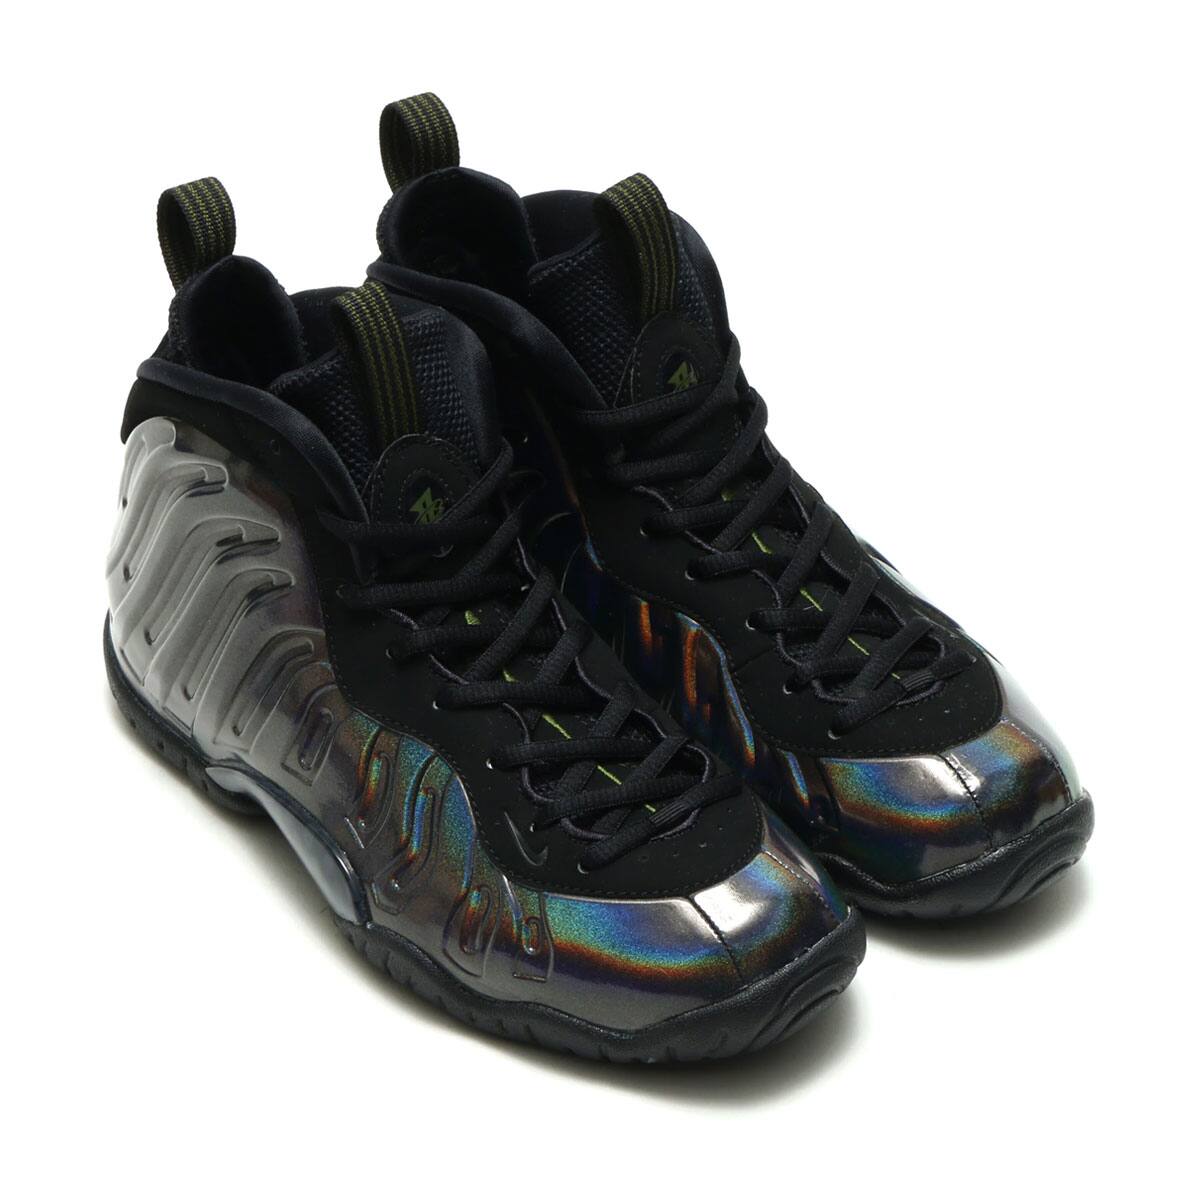 nike little posite one basketball shoes